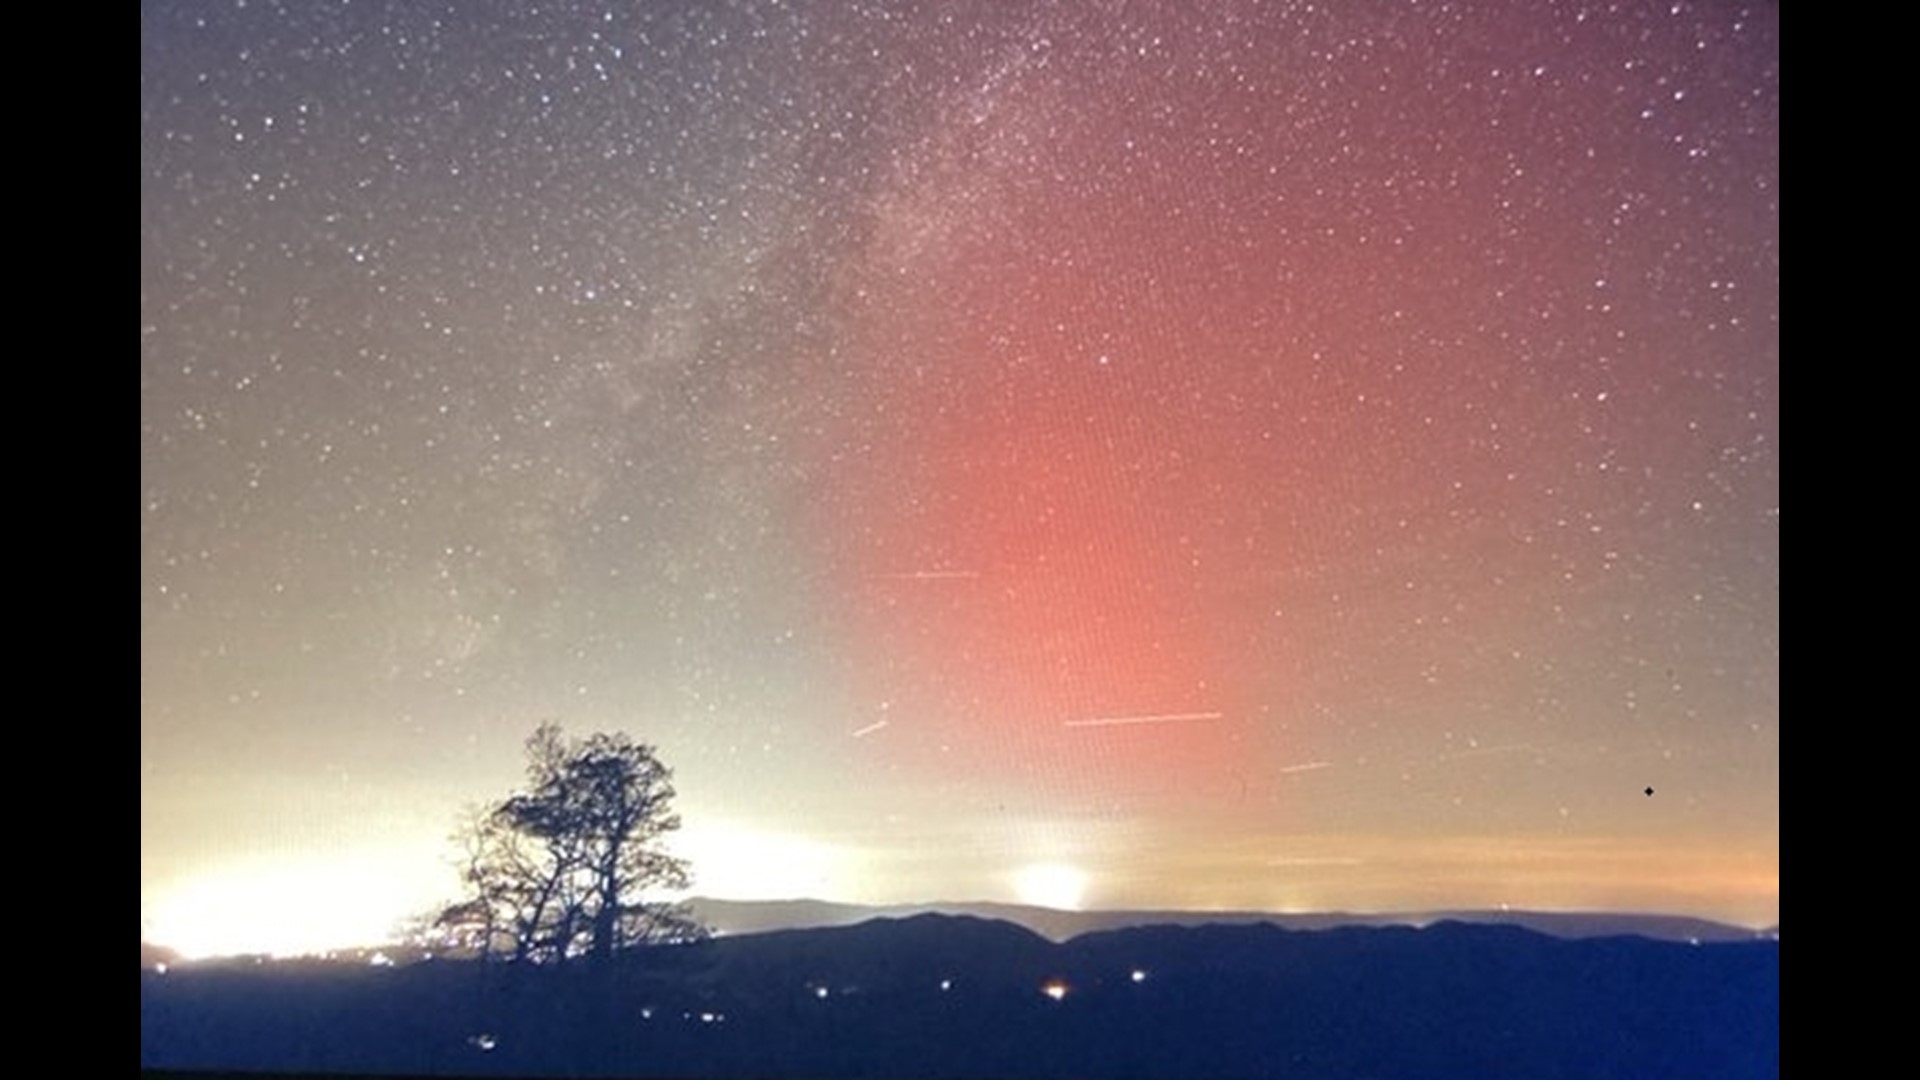 A strong geomagnetic storm this weekend made an aurora visible in parts of the United States.